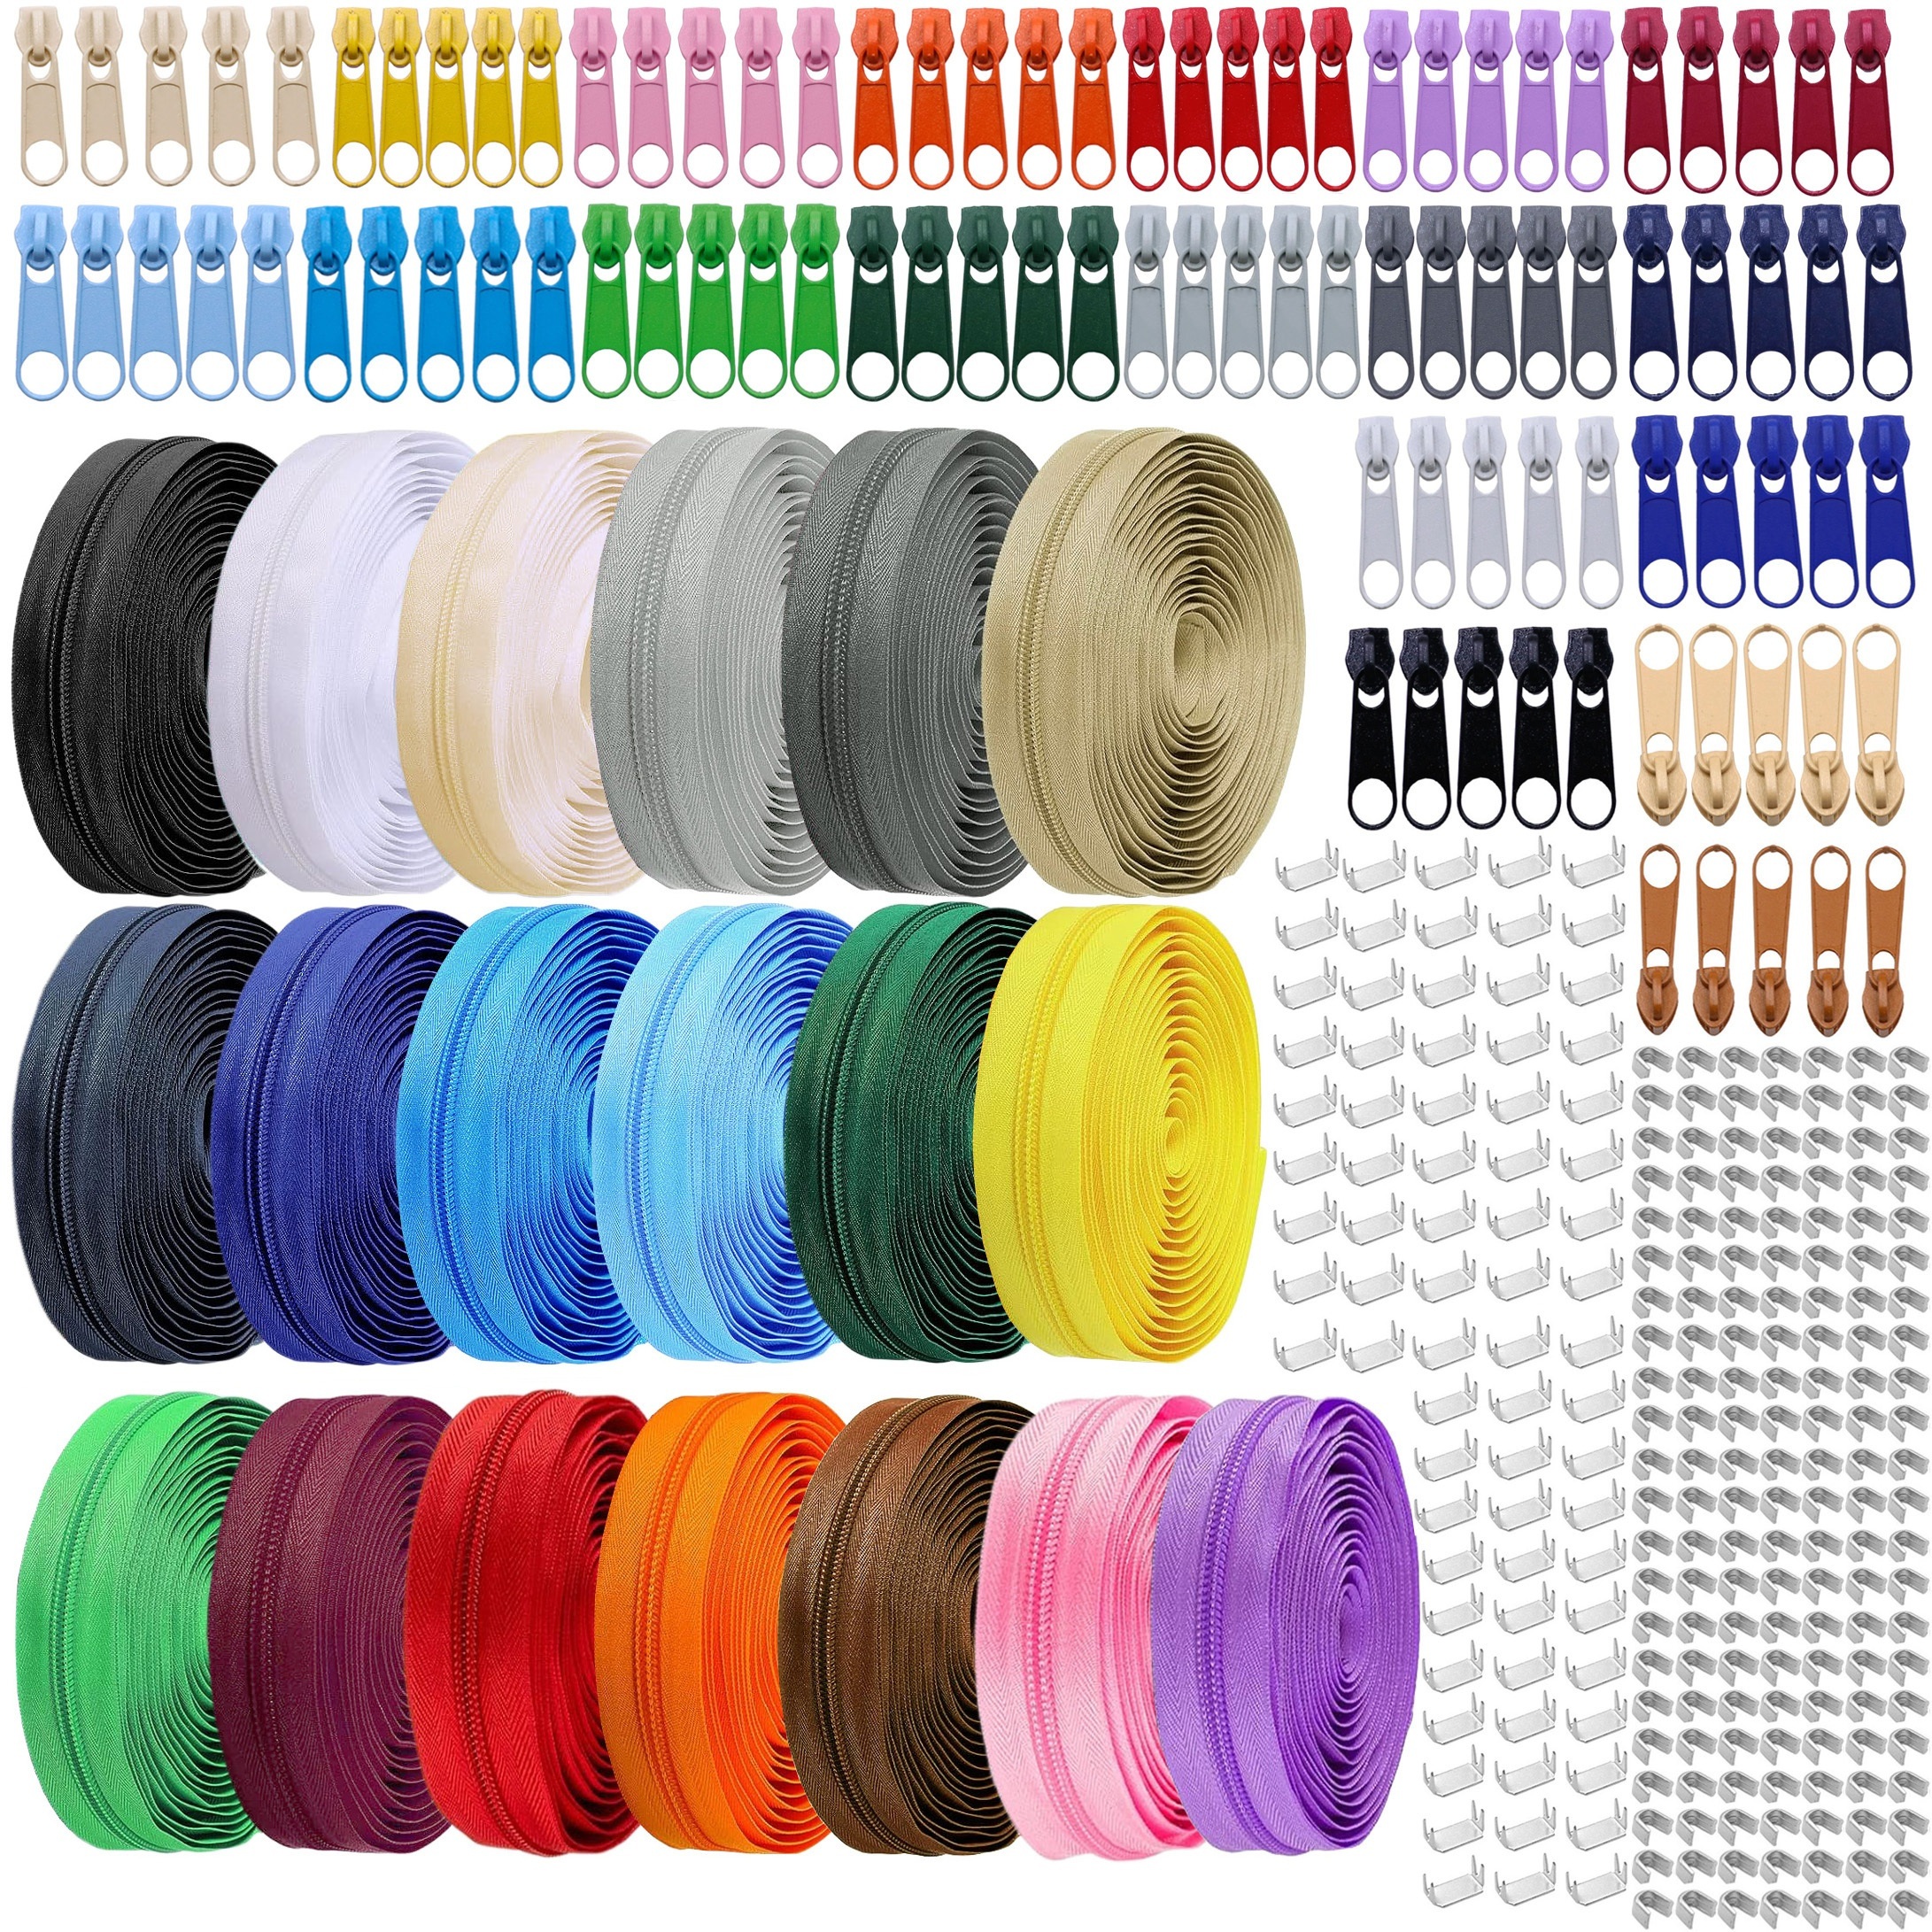 

19 Colors No. 5 Zipper 76 Yards Long 95 Zipper Heads + 95 Upper Stoppers + 190 Lower Stoppers